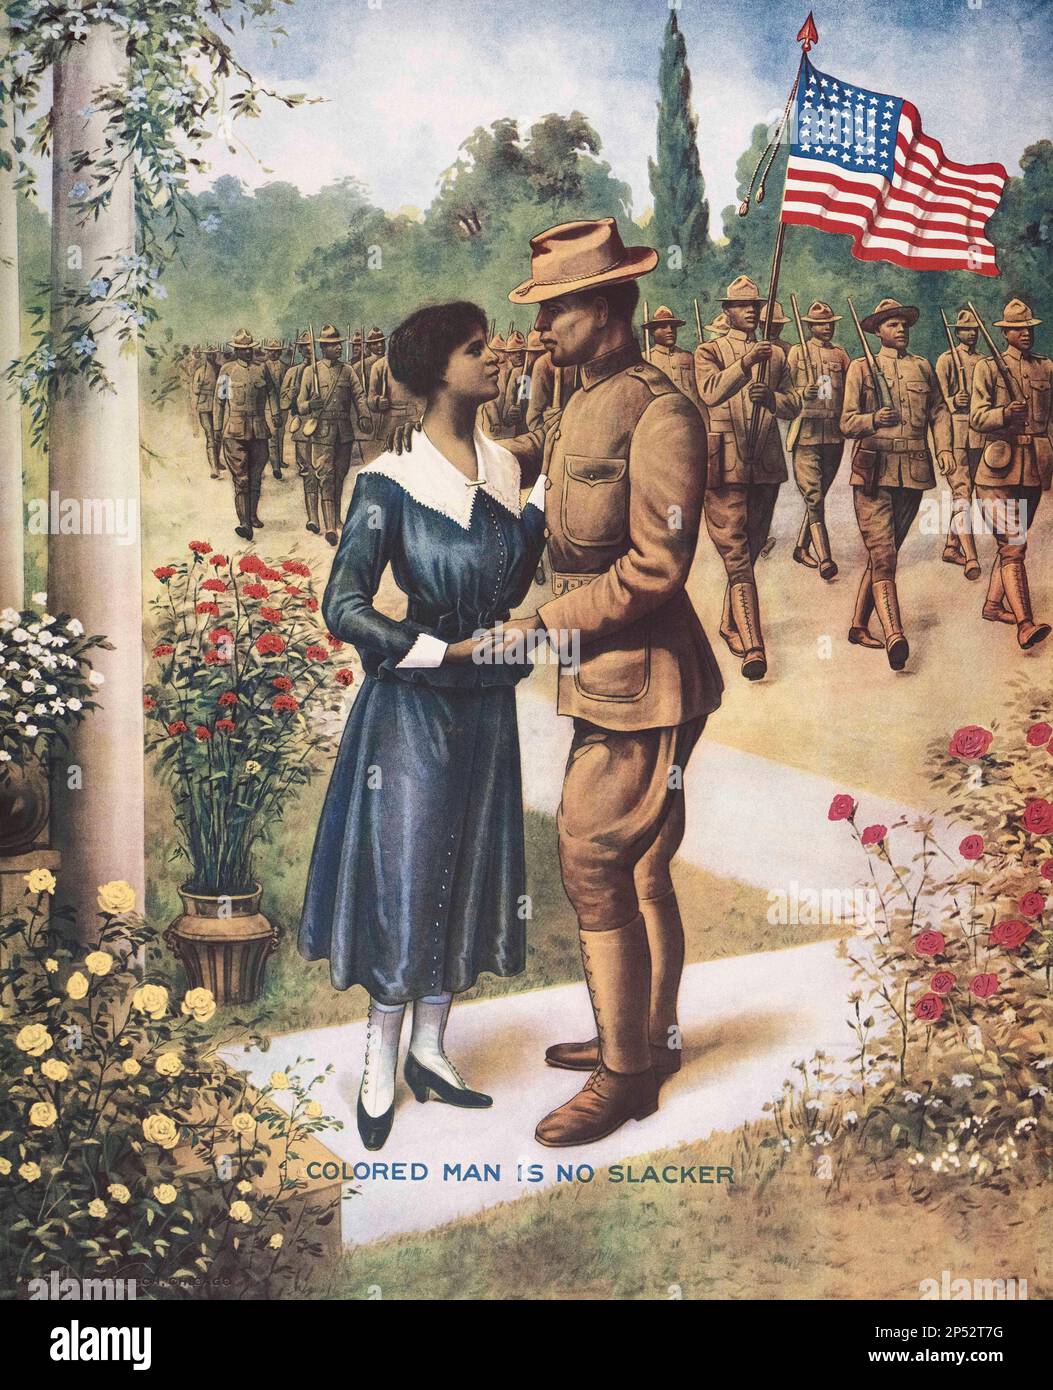 'Colored Man is No Slacker'.  One of a series of United States government posters produced during World War I to encourage African American recruitment into the armed services. Stock Photo